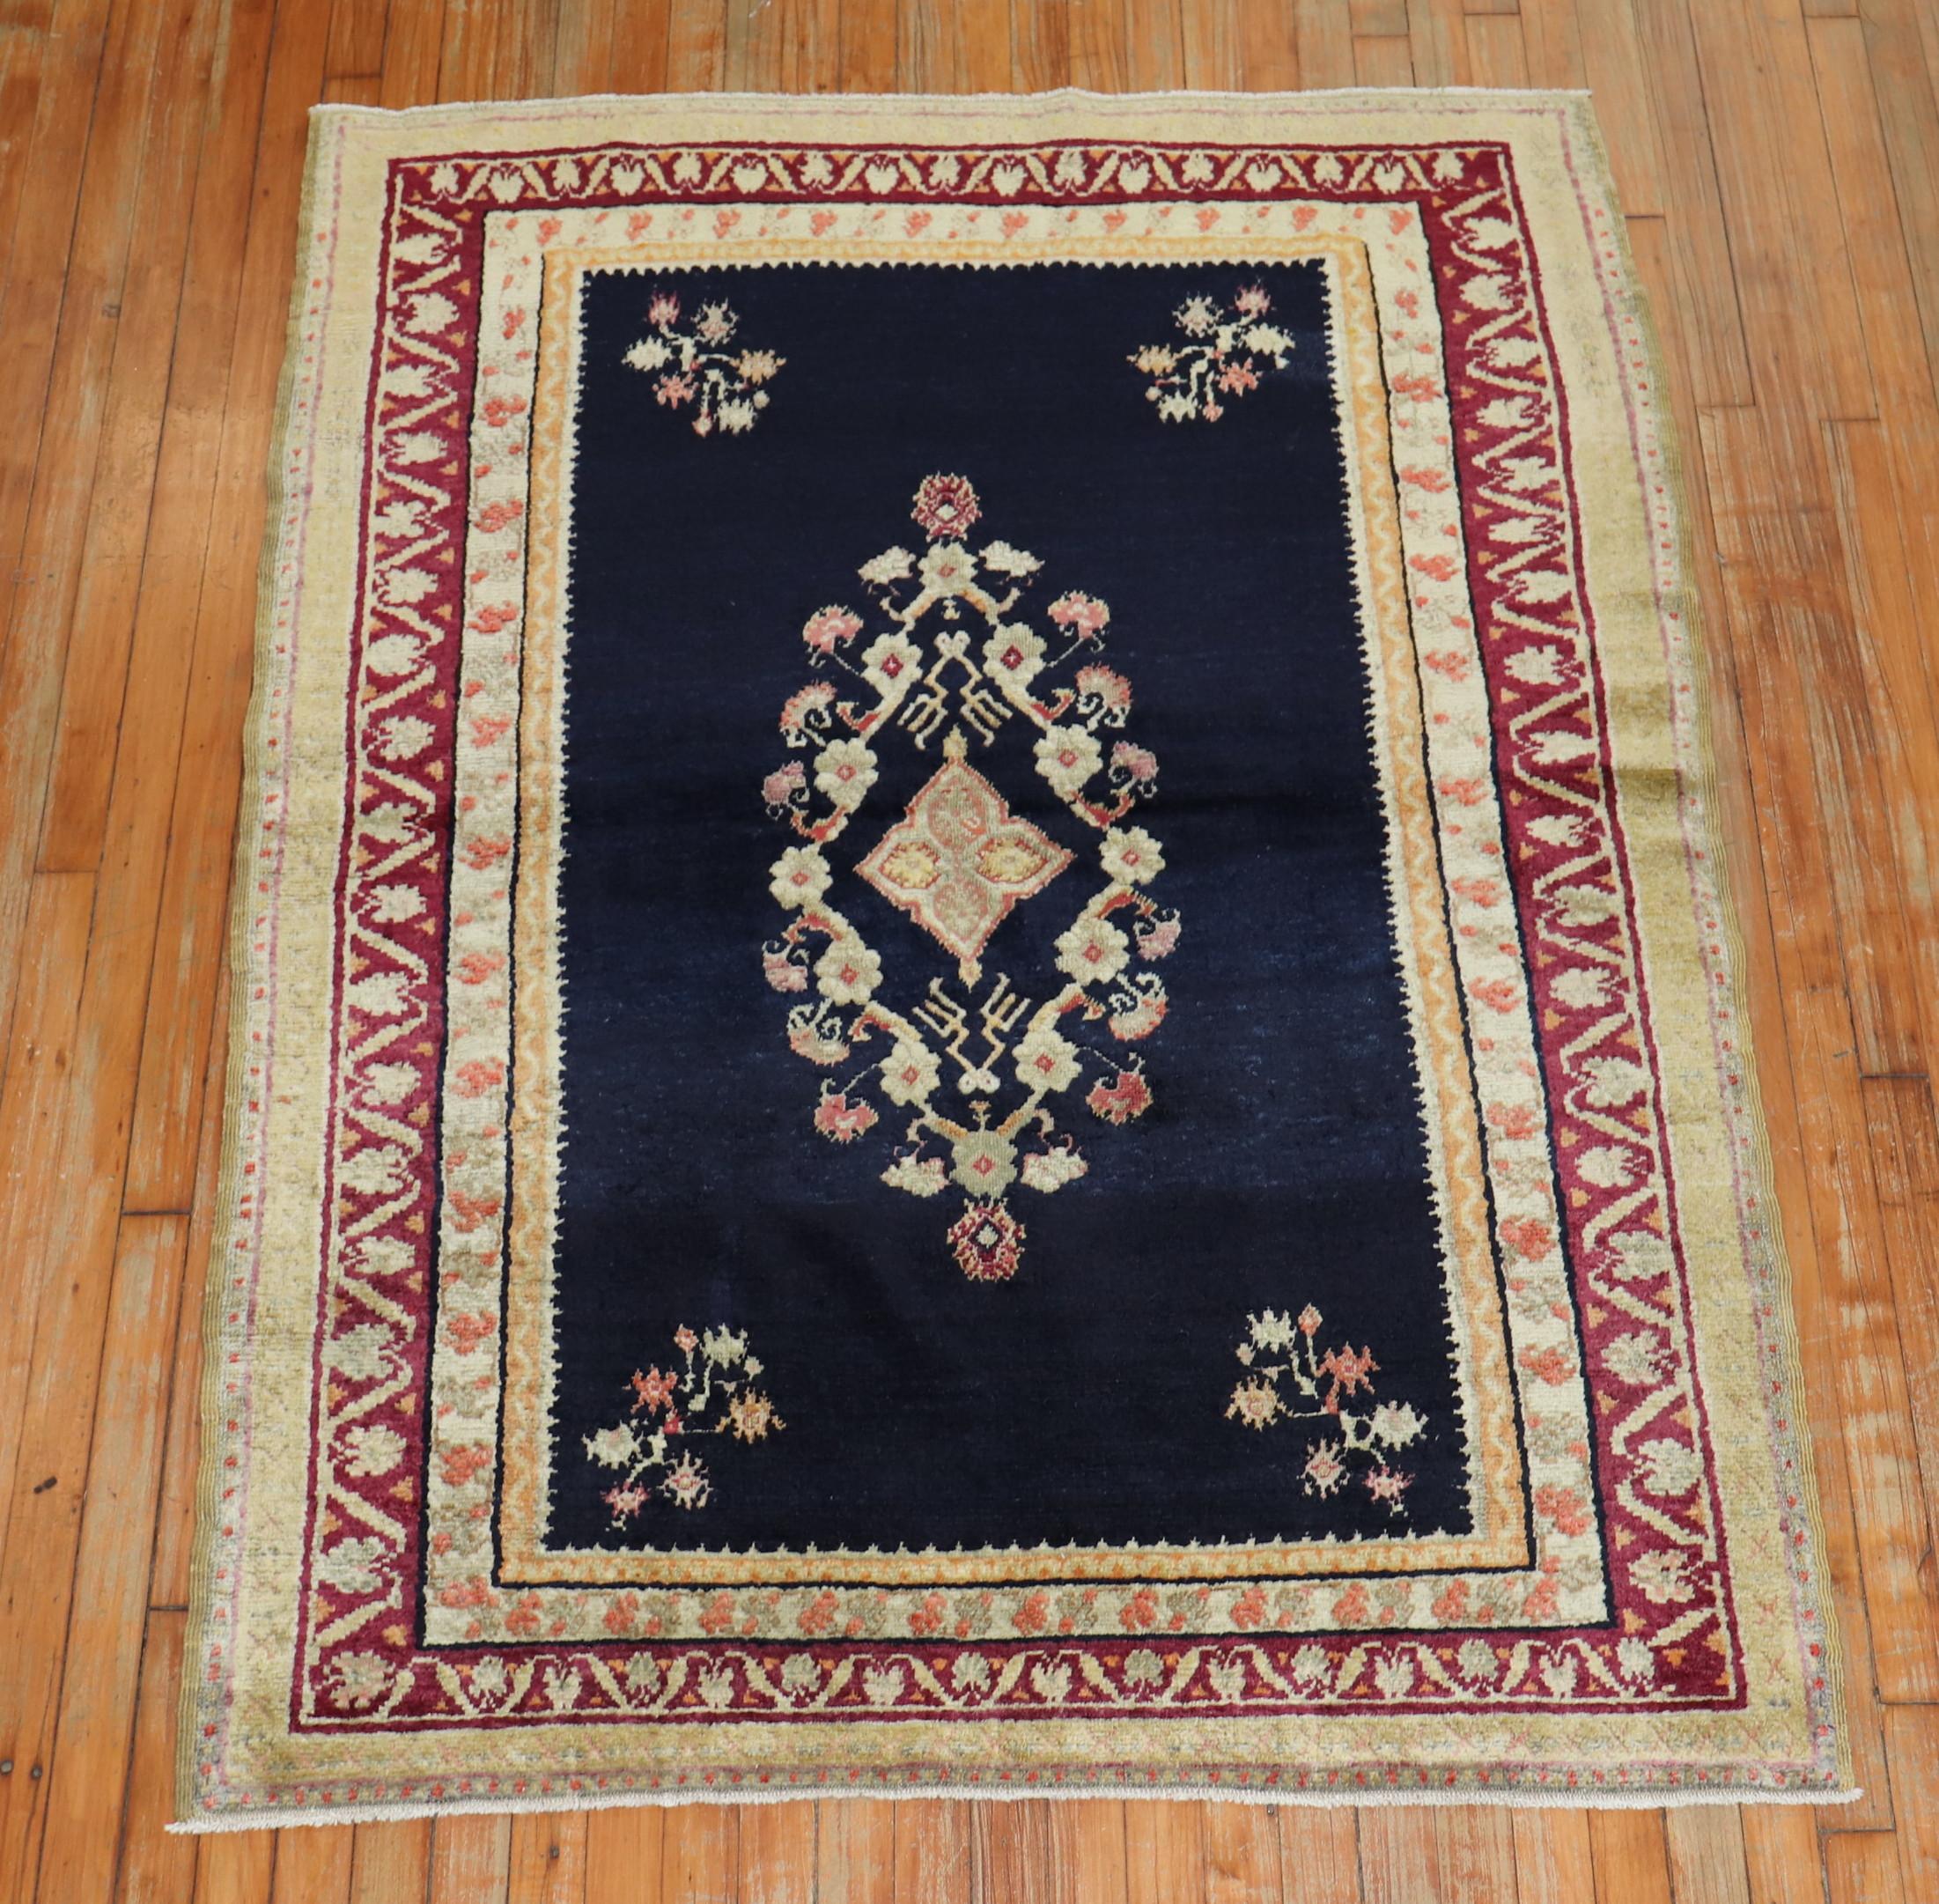 An early 20th century fine Turkish Ghiordes rug featuring an elegant floral motif with a navy ground, accents in peach, ivory, pink, the main border is raspberry, circa 1900.

Measures: 4'4'' x 5'10''.